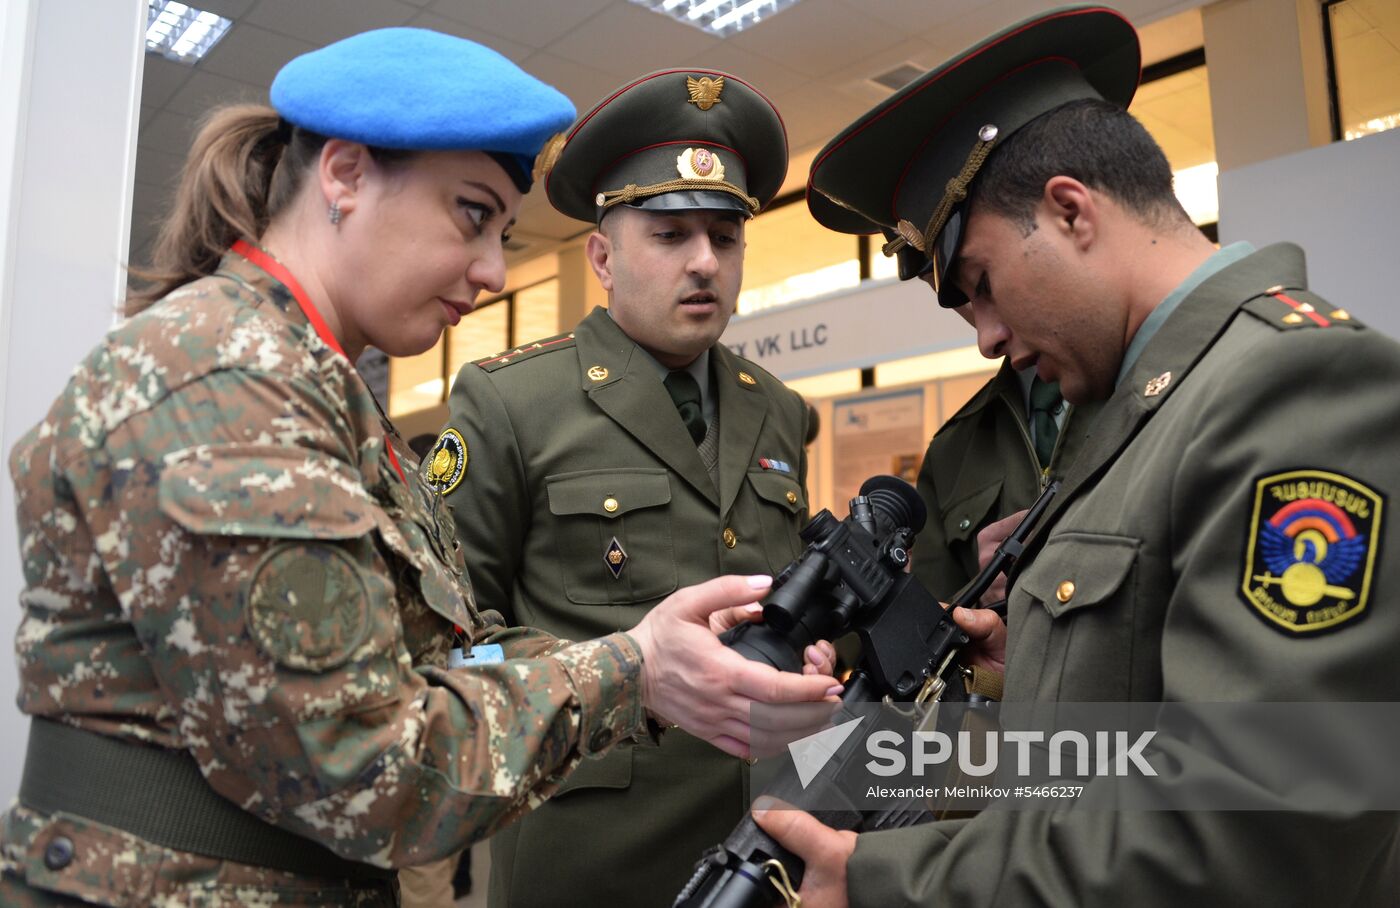 ArmHiTec-2018 International Exhibition of Arms and Defense Technologies in Yerevan